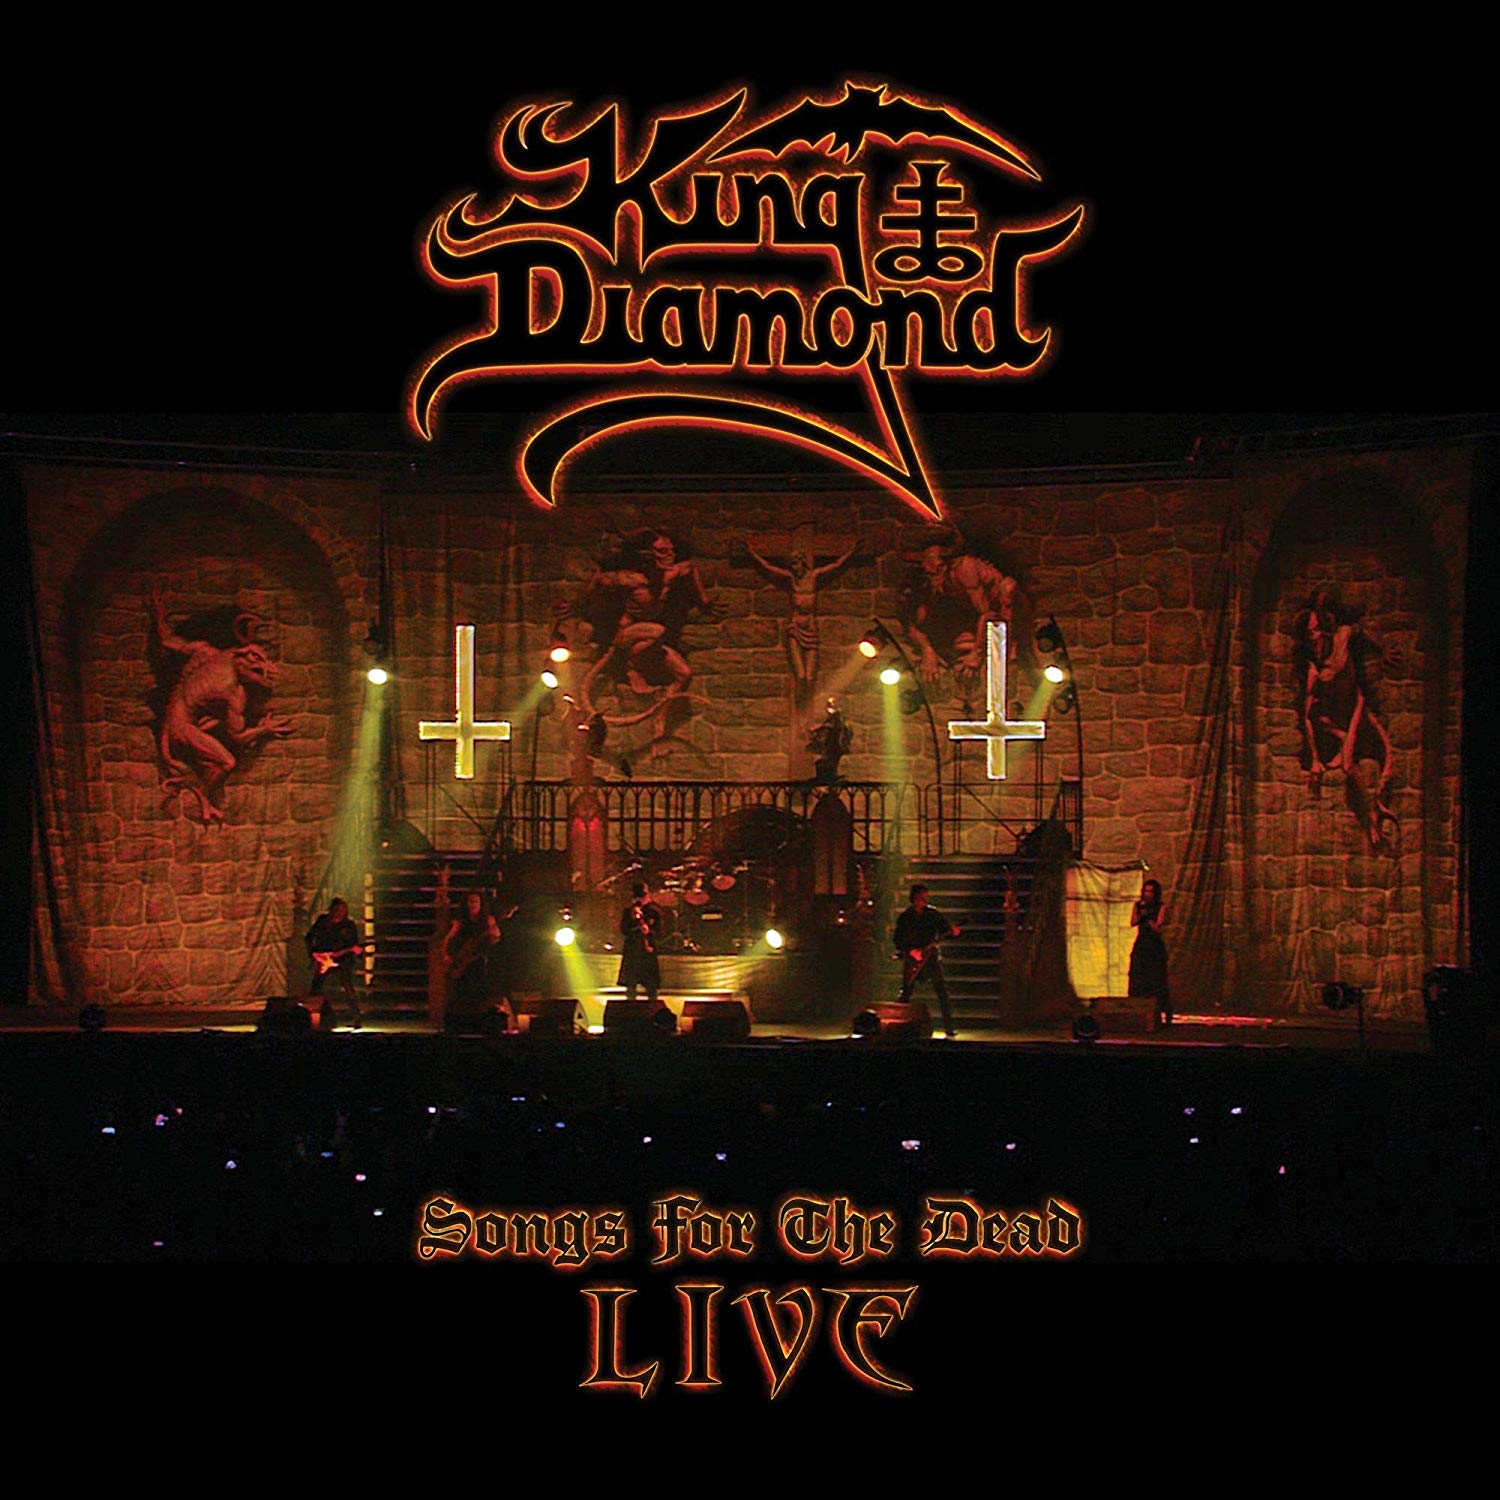 King Diamond - Songs For The Dead Live | Upcoming Vinyl (January 25, 2019) - King Diamond Songs For The Dead Live